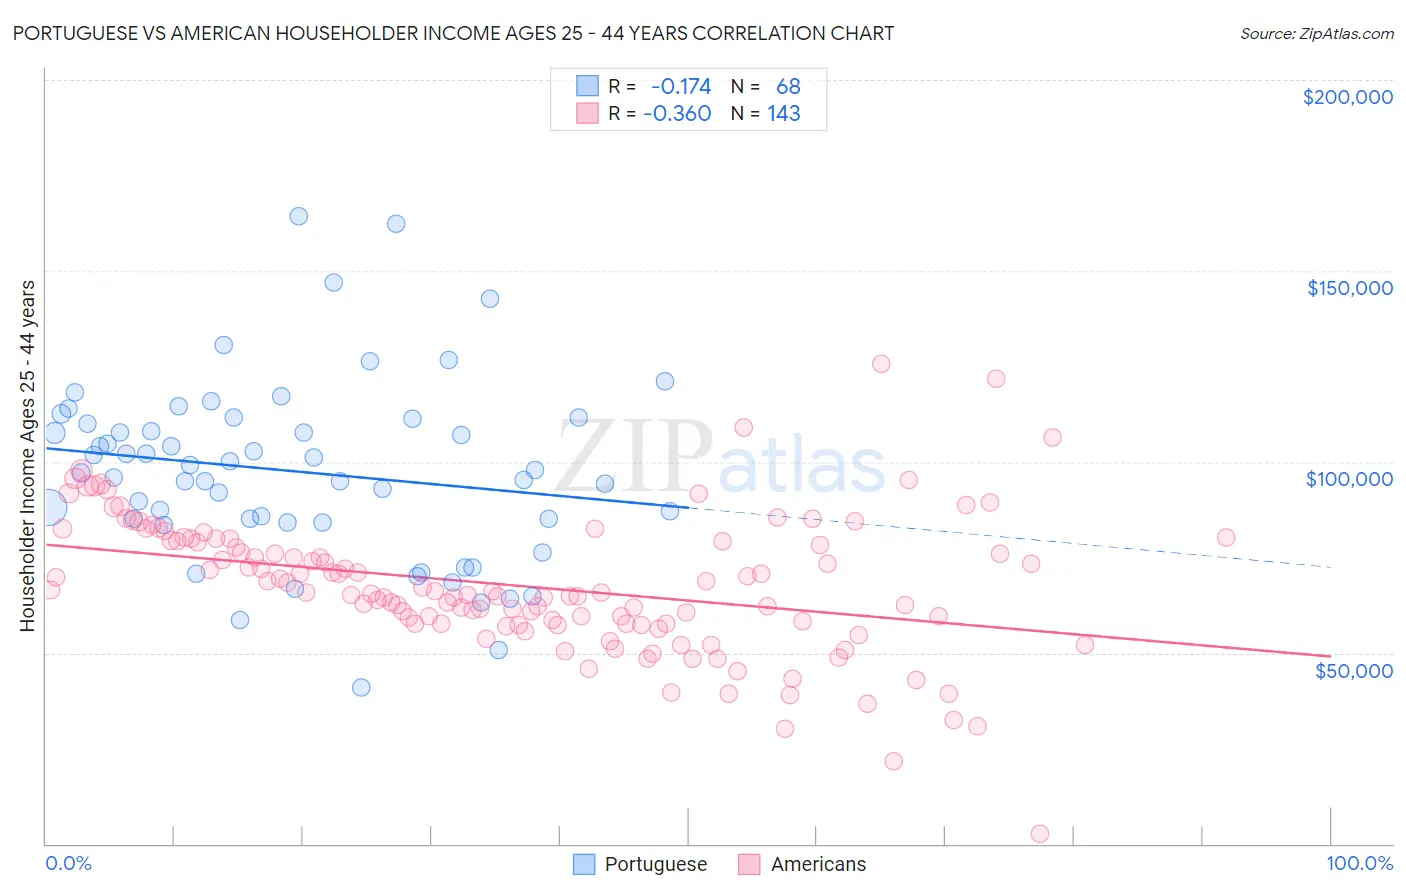 Portuguese vs American Householder Income Ages 25 - 44 years